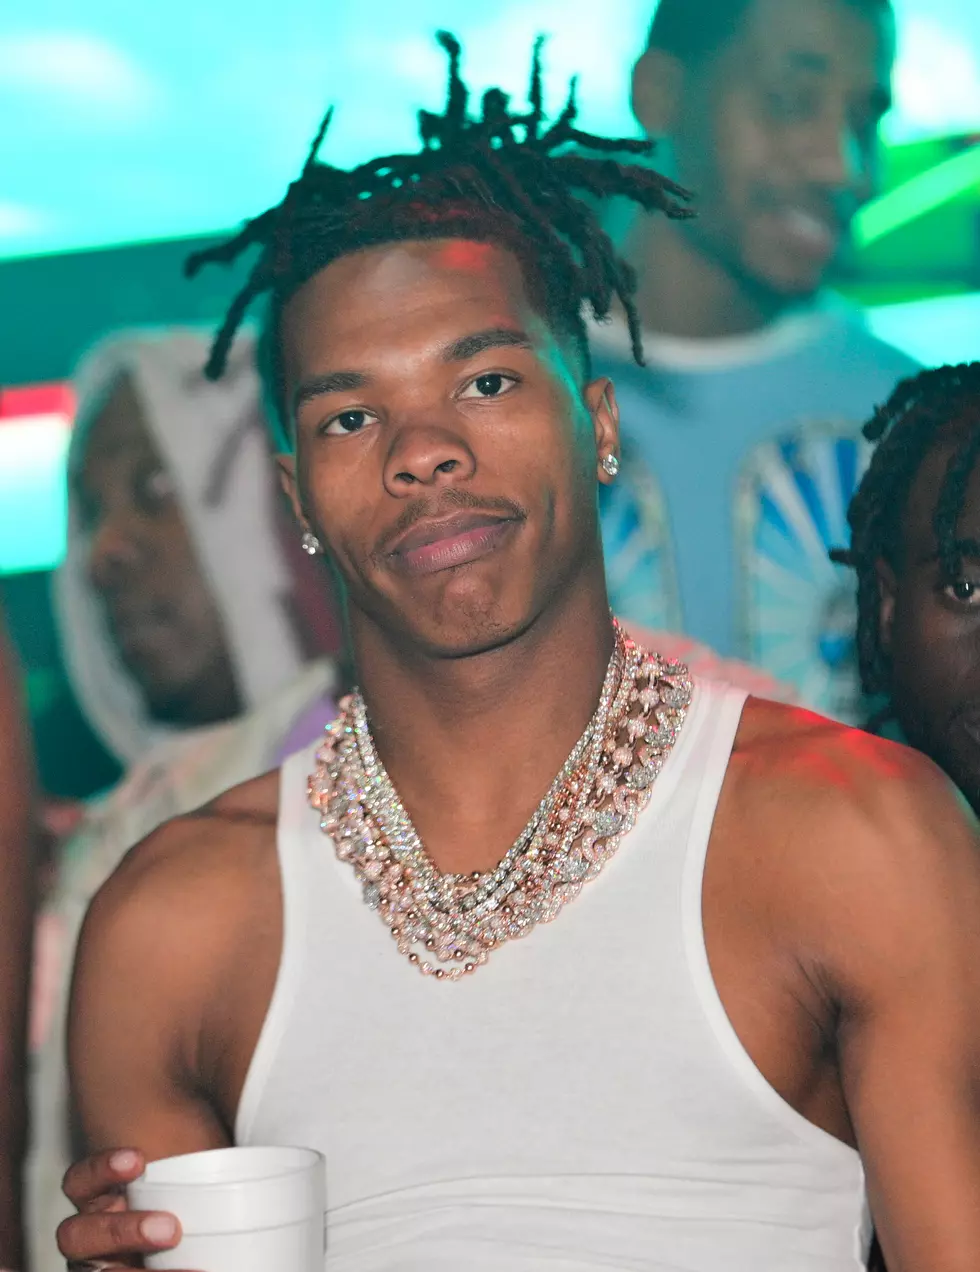 Lil Baby attends Lil Baby's "It's Only Me" Album release Party at Onyx Nightclub on October 21, 2022 in Atlanta, Georgia.